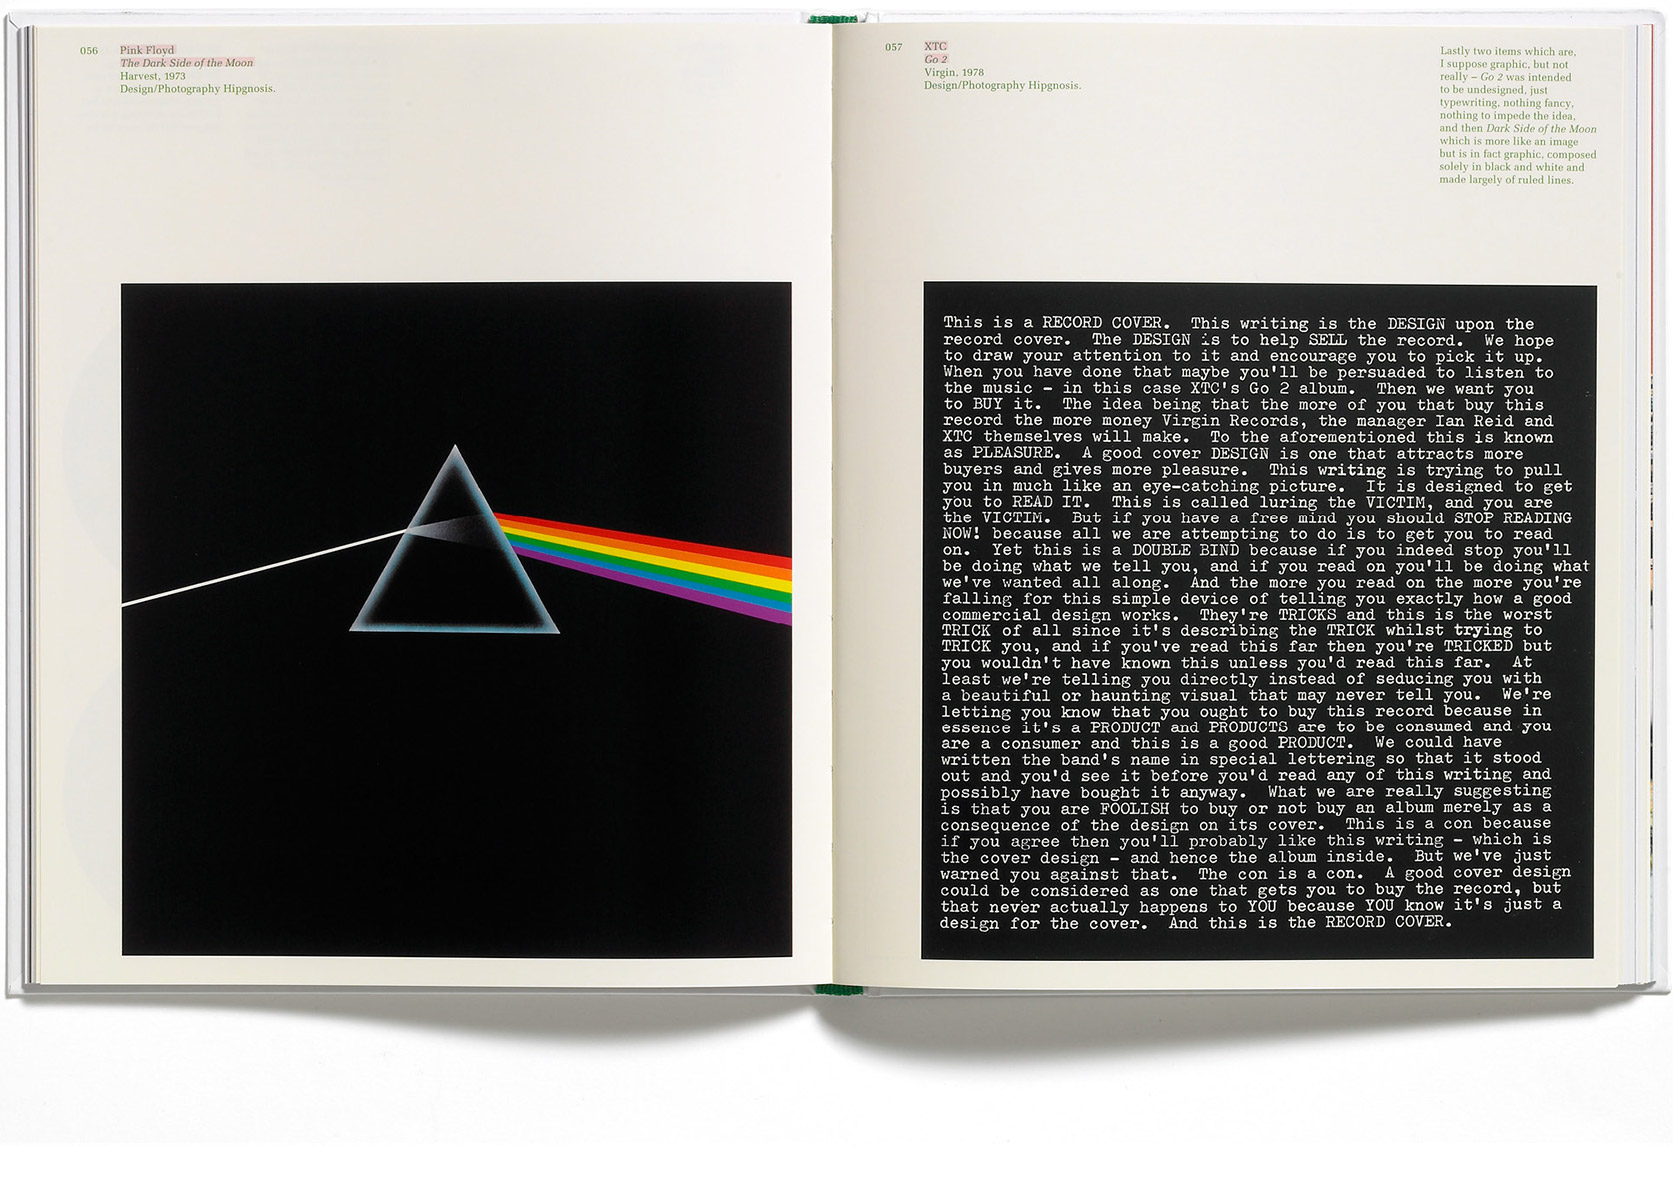 Browns Editions, Browns Editions Publishing, Browns Editions Books, Browns Editions Storm Thorgerson, Browns Editions HSP Lecture Series 5, Browns Editions Storm Thorgerson HSP Lecture Series 5